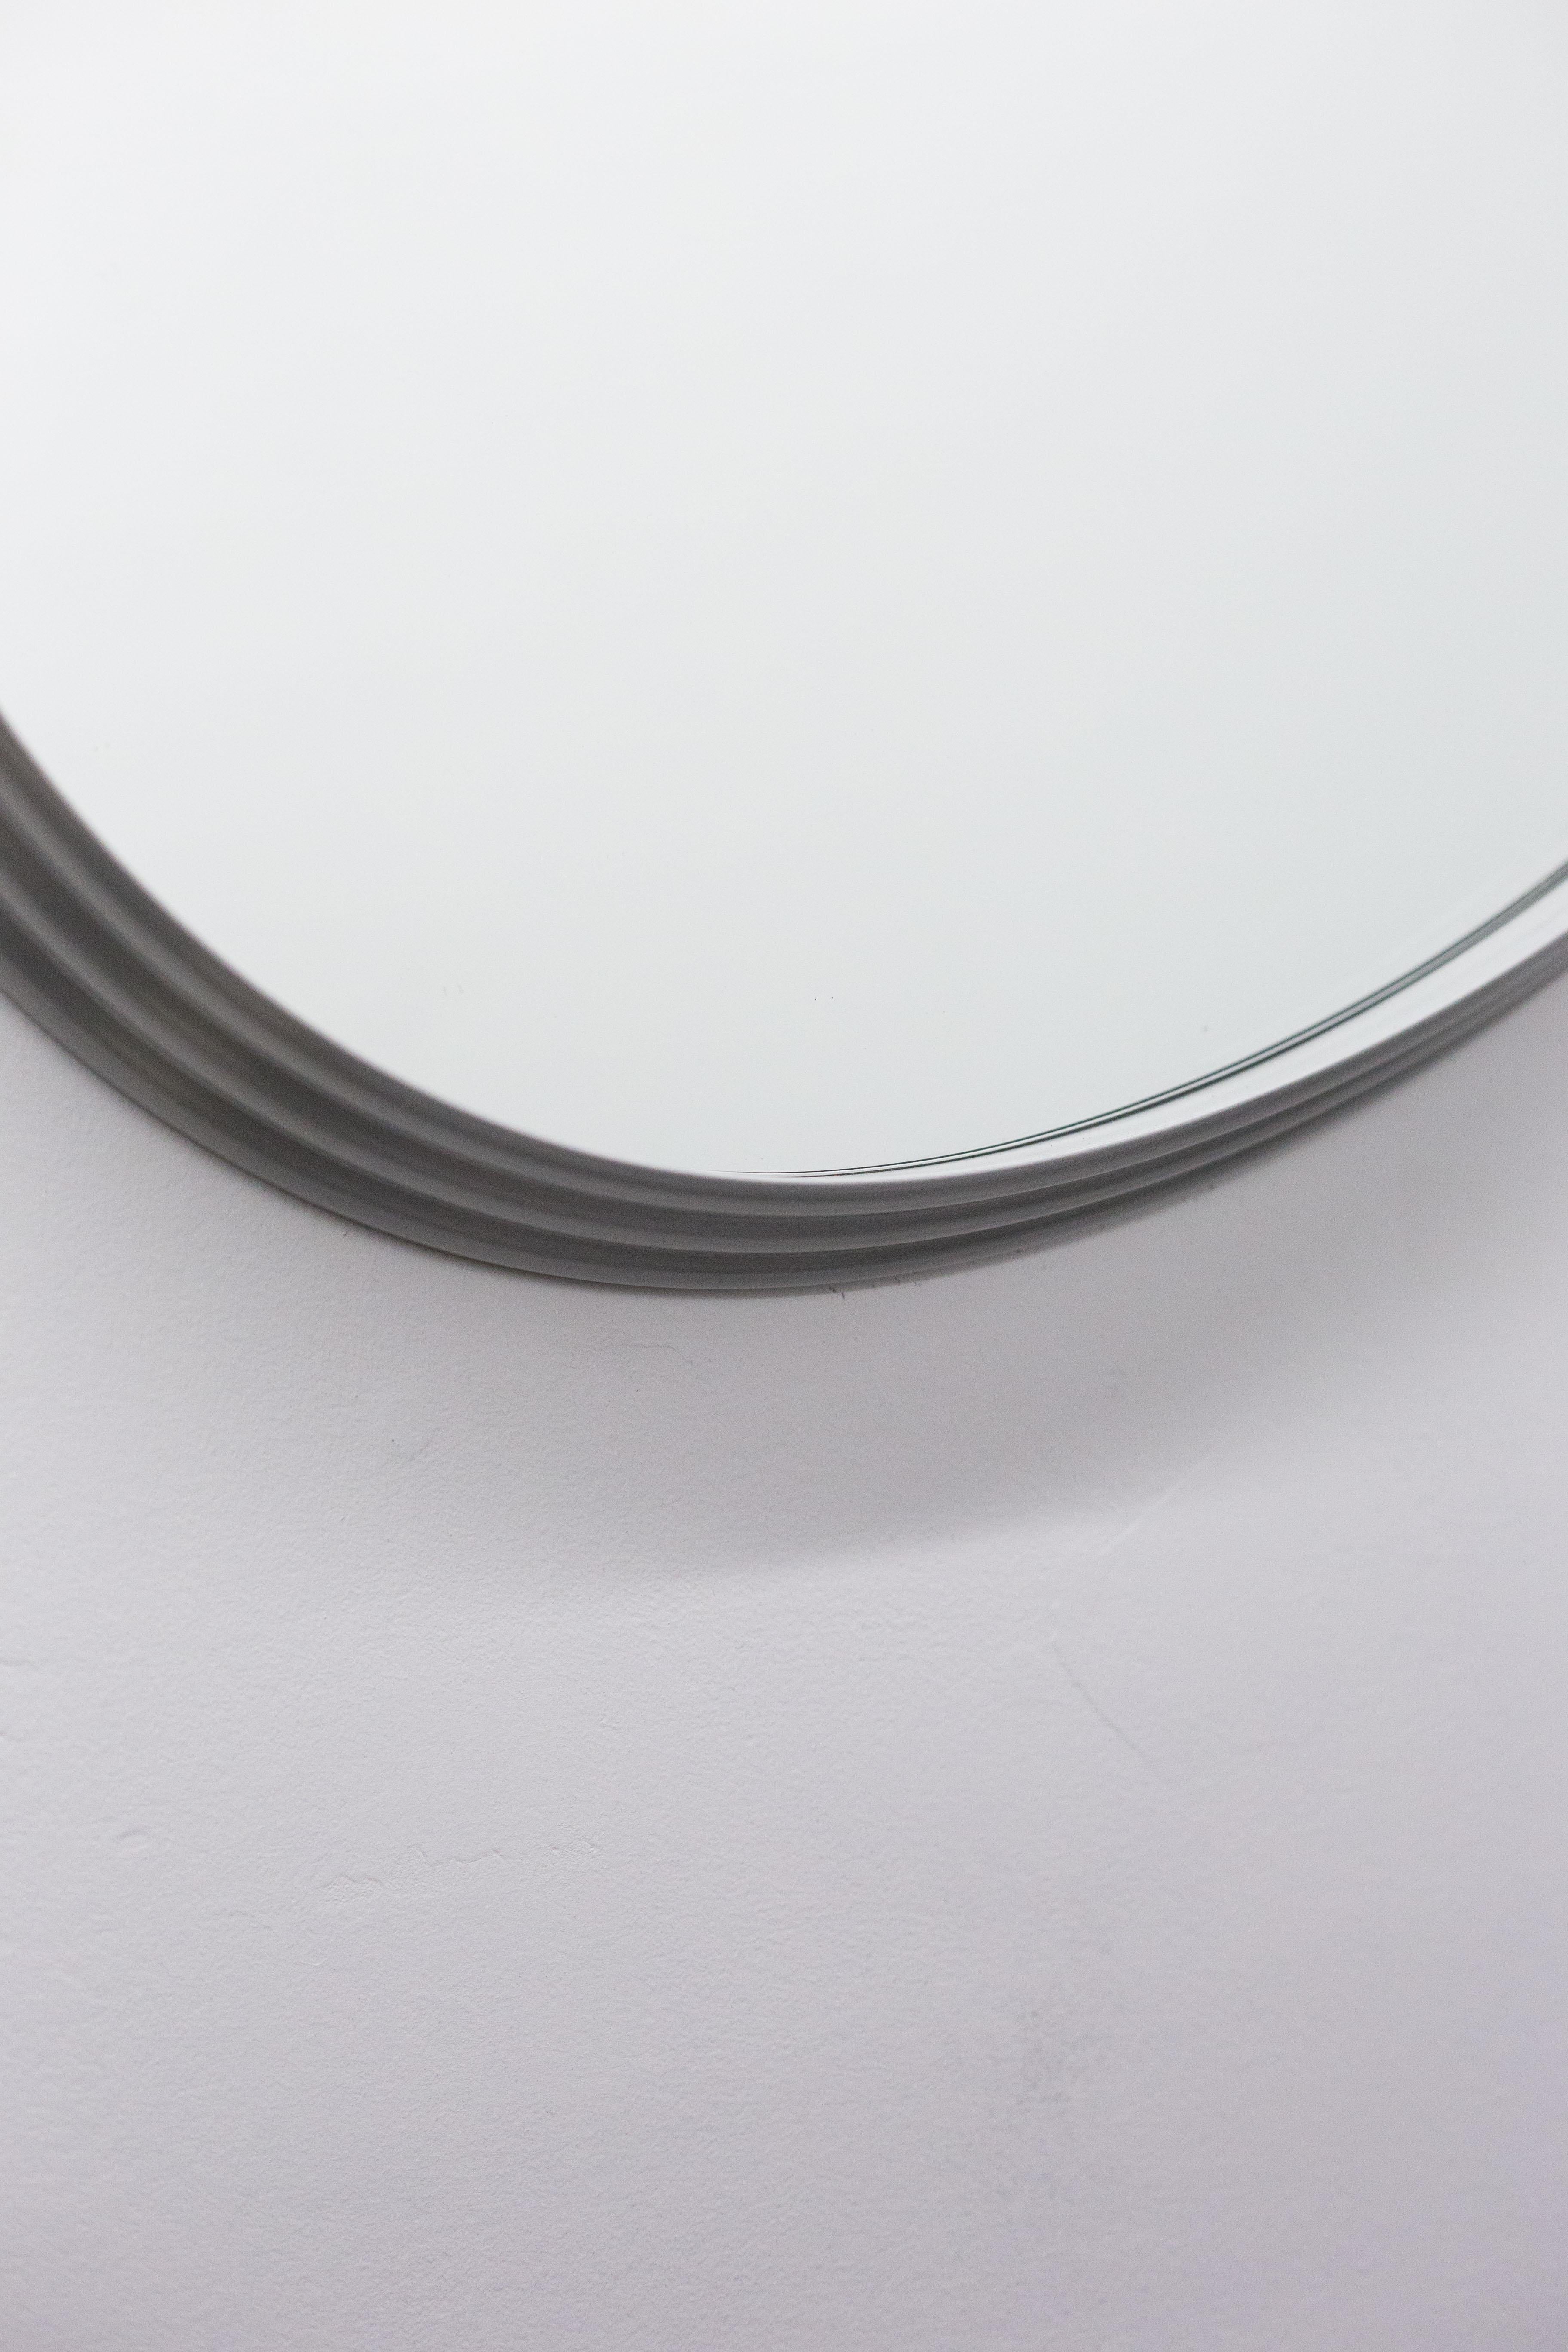 Sweep Wall Mirror in Brushed Aluminum For Sale 3